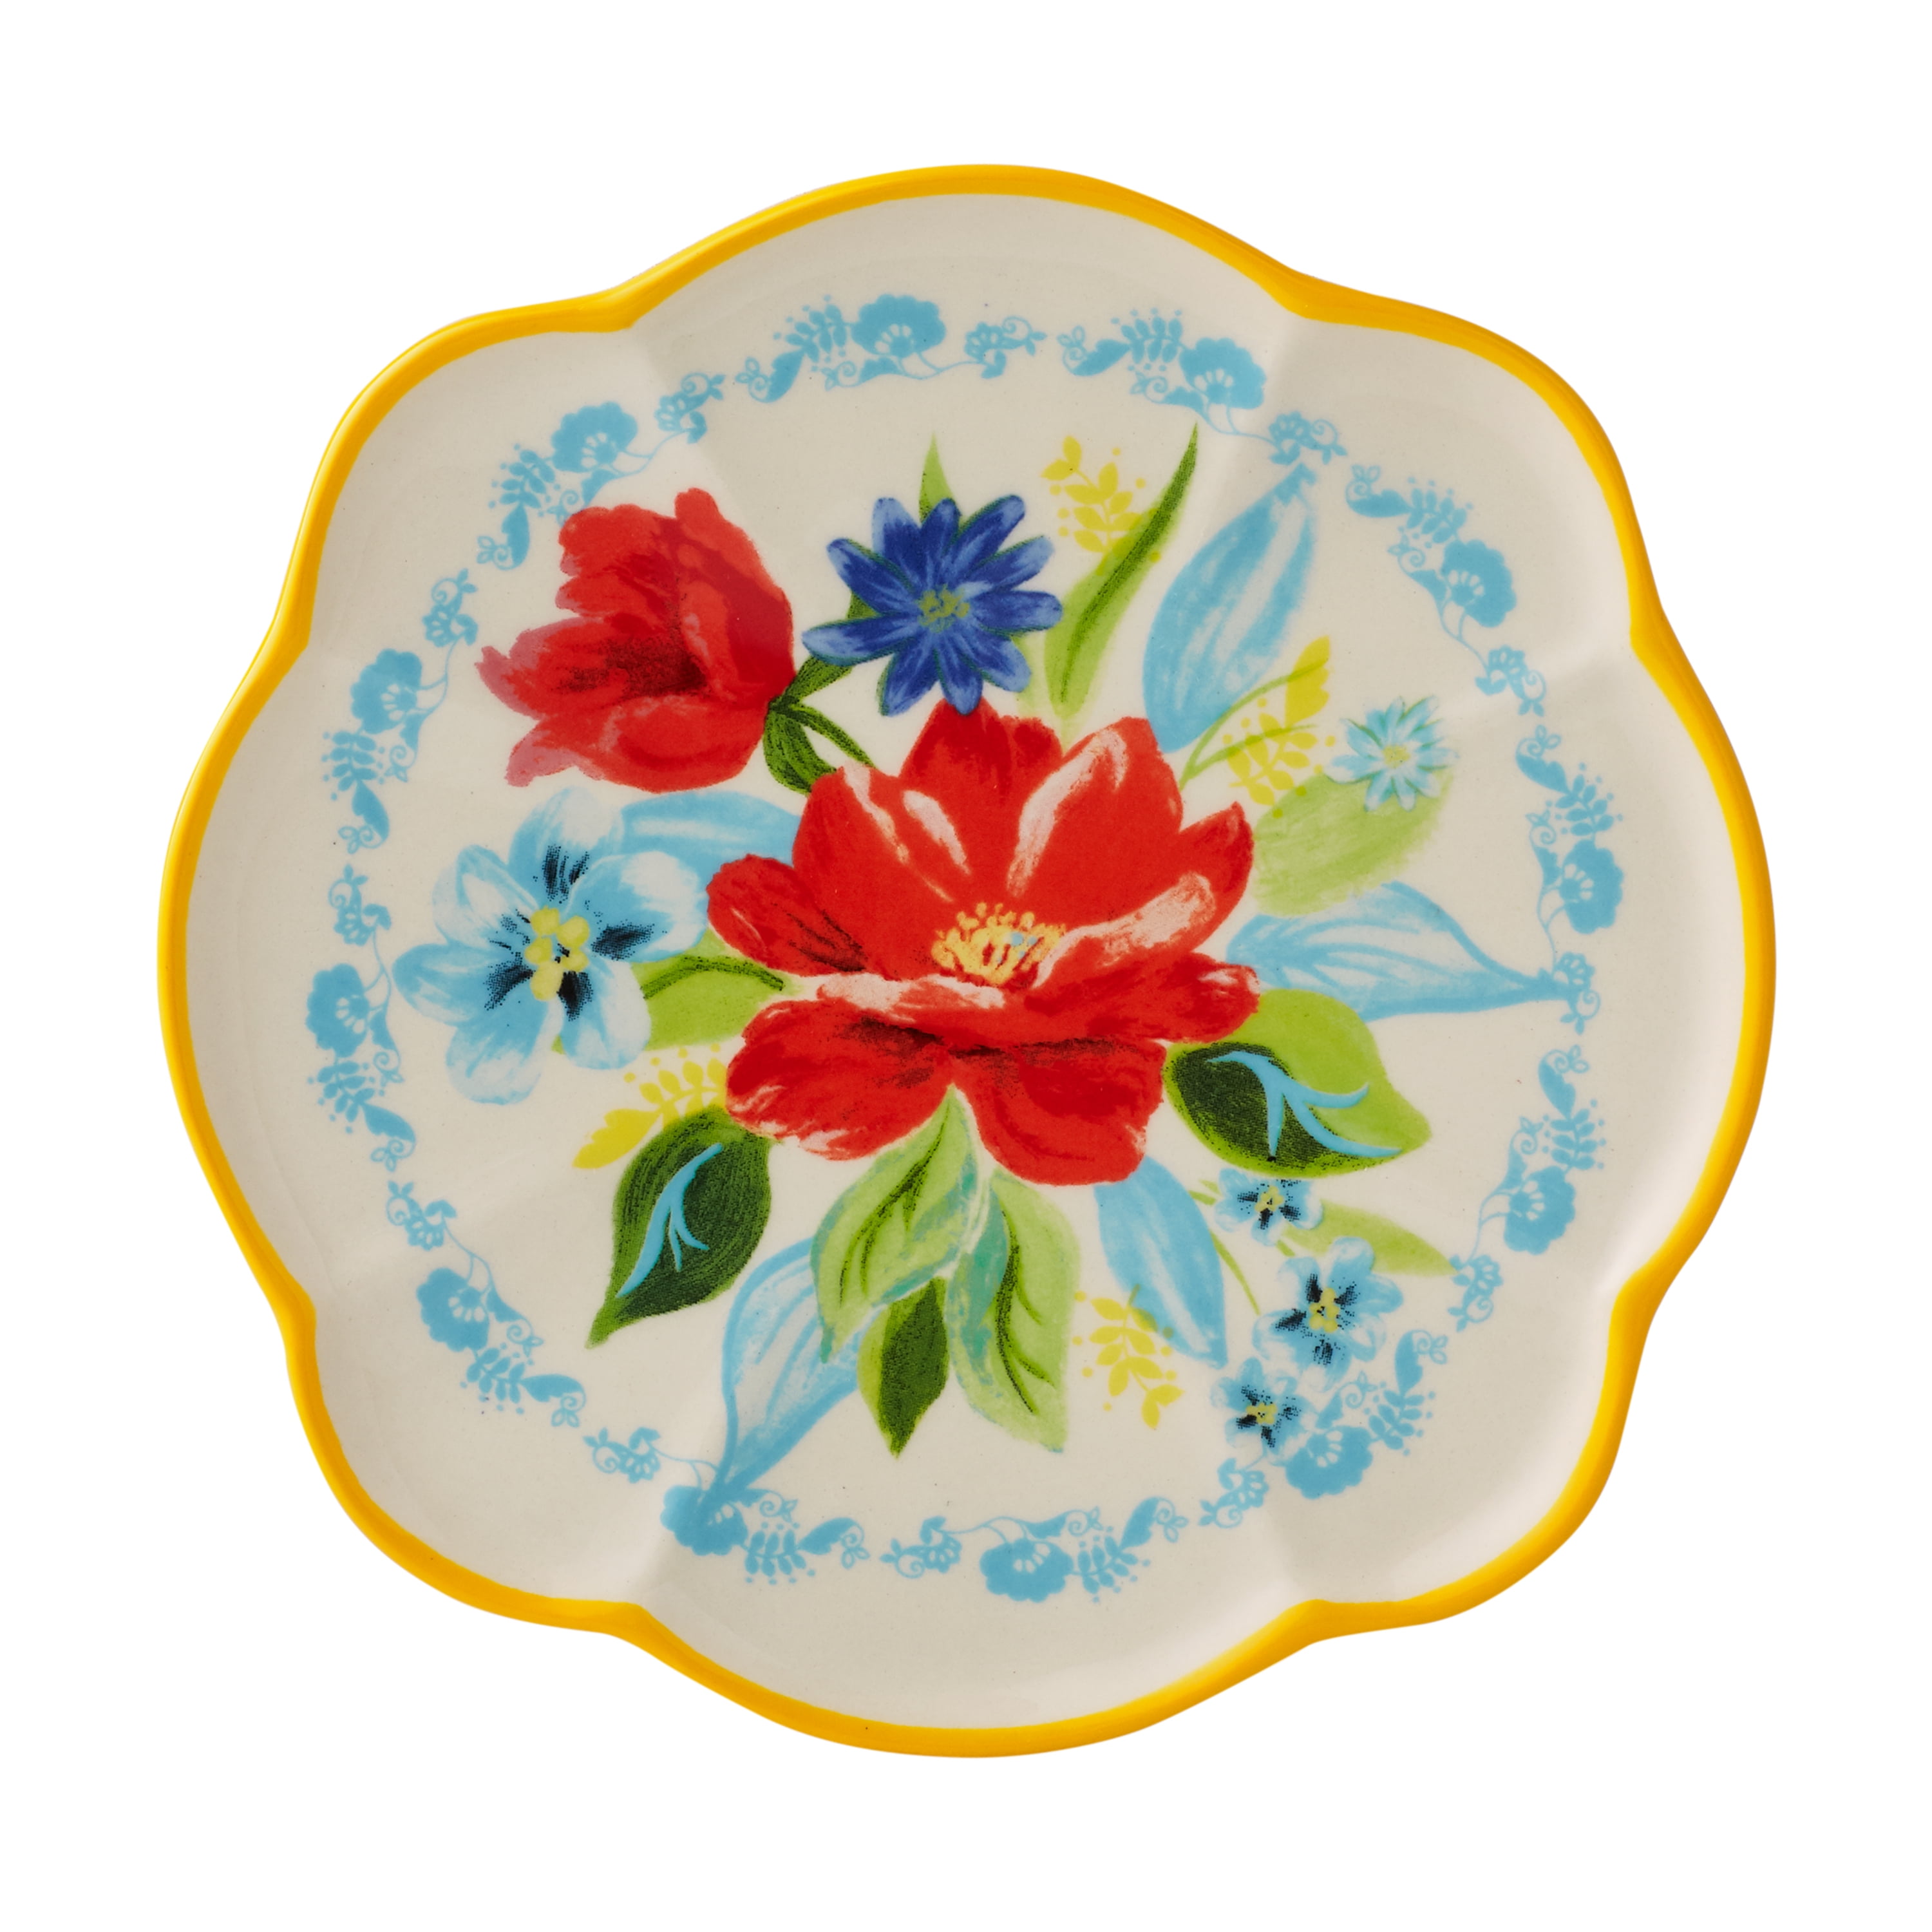 Details about   The Pioneer Woman Floral Medley Mug Rack w/Appetizer Plates and Mugs,9-Piece Set 